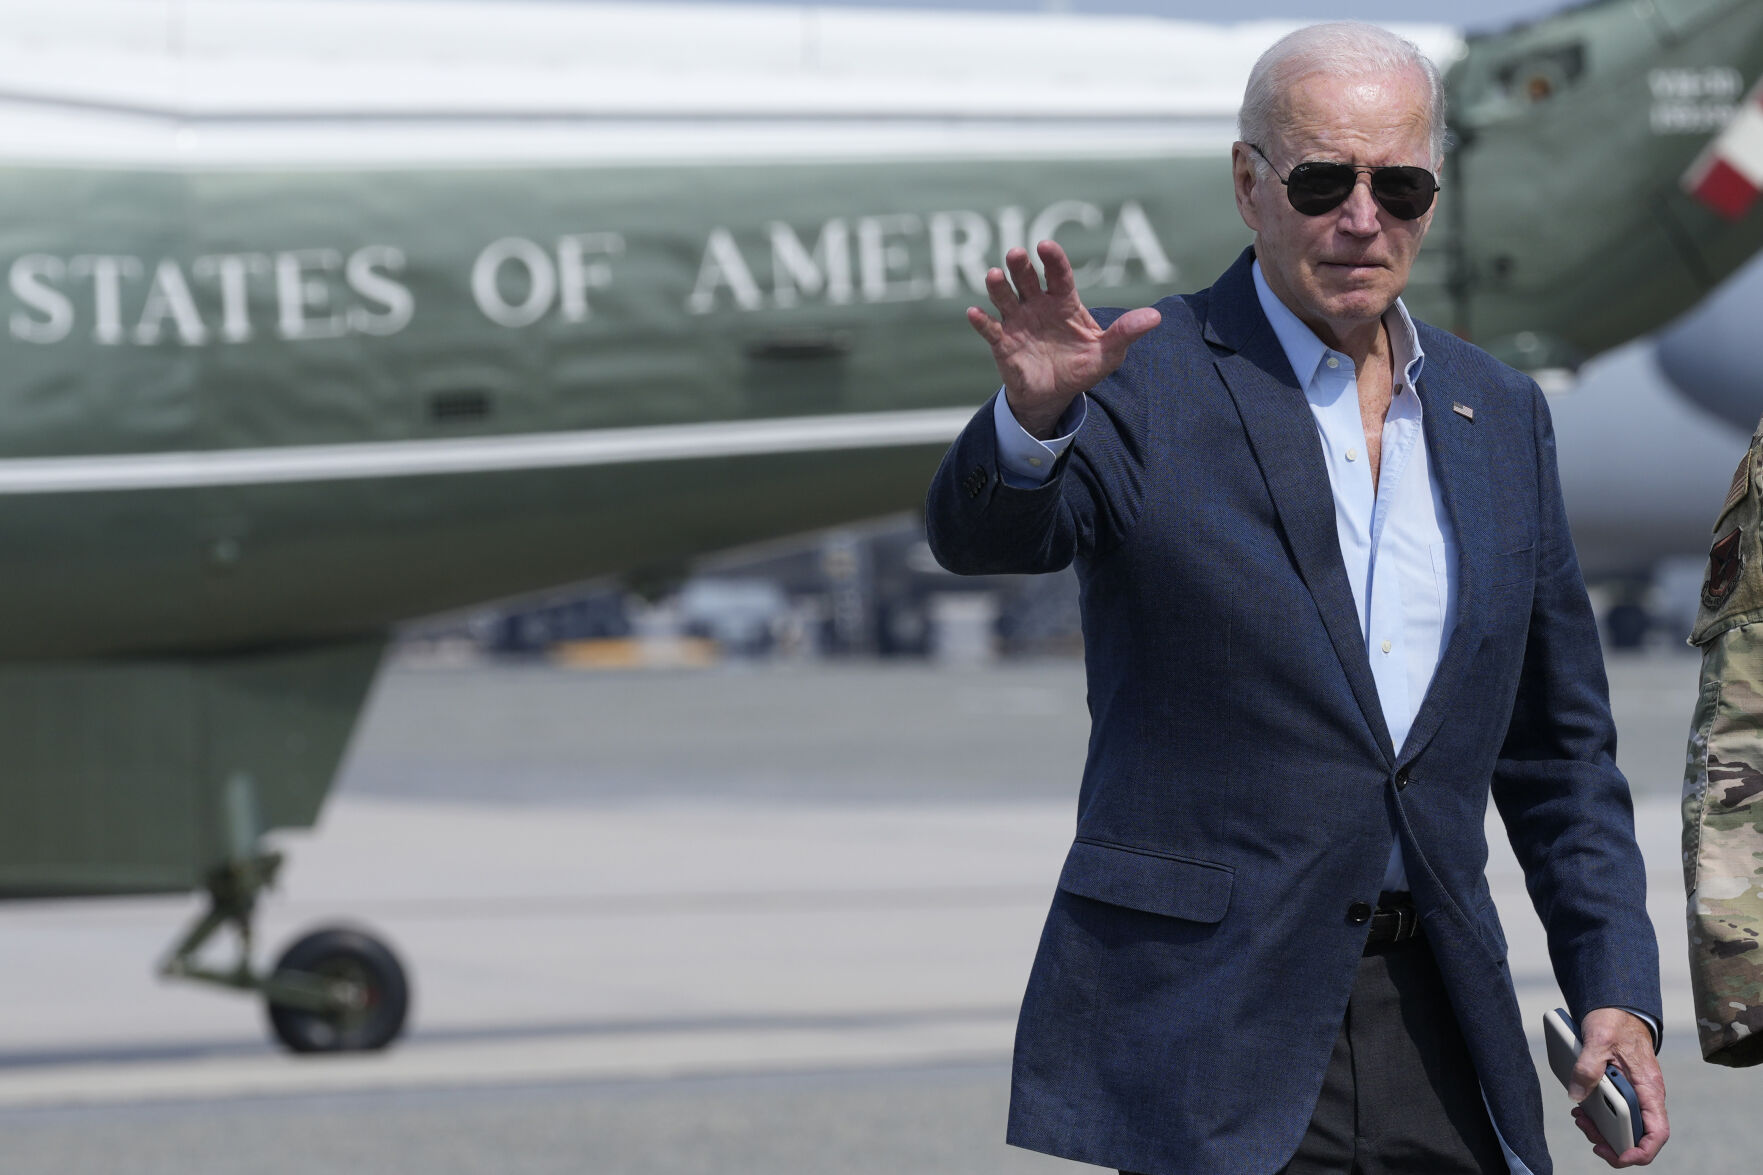 <p>President Joe Biden waves as he walks to board Air Force One at Dover Air Force Base, Del., Monday, June 19, 2023, as he heads to California. Biden is ramping up his reelection effort this week with four fundraisers in the San Francisco area, as his campaign builds up its coffers and lays strategic foundations for 2024. (AP Photo/Susan Walsh)</p>   PHOTO CREDIT: Susan Walsh